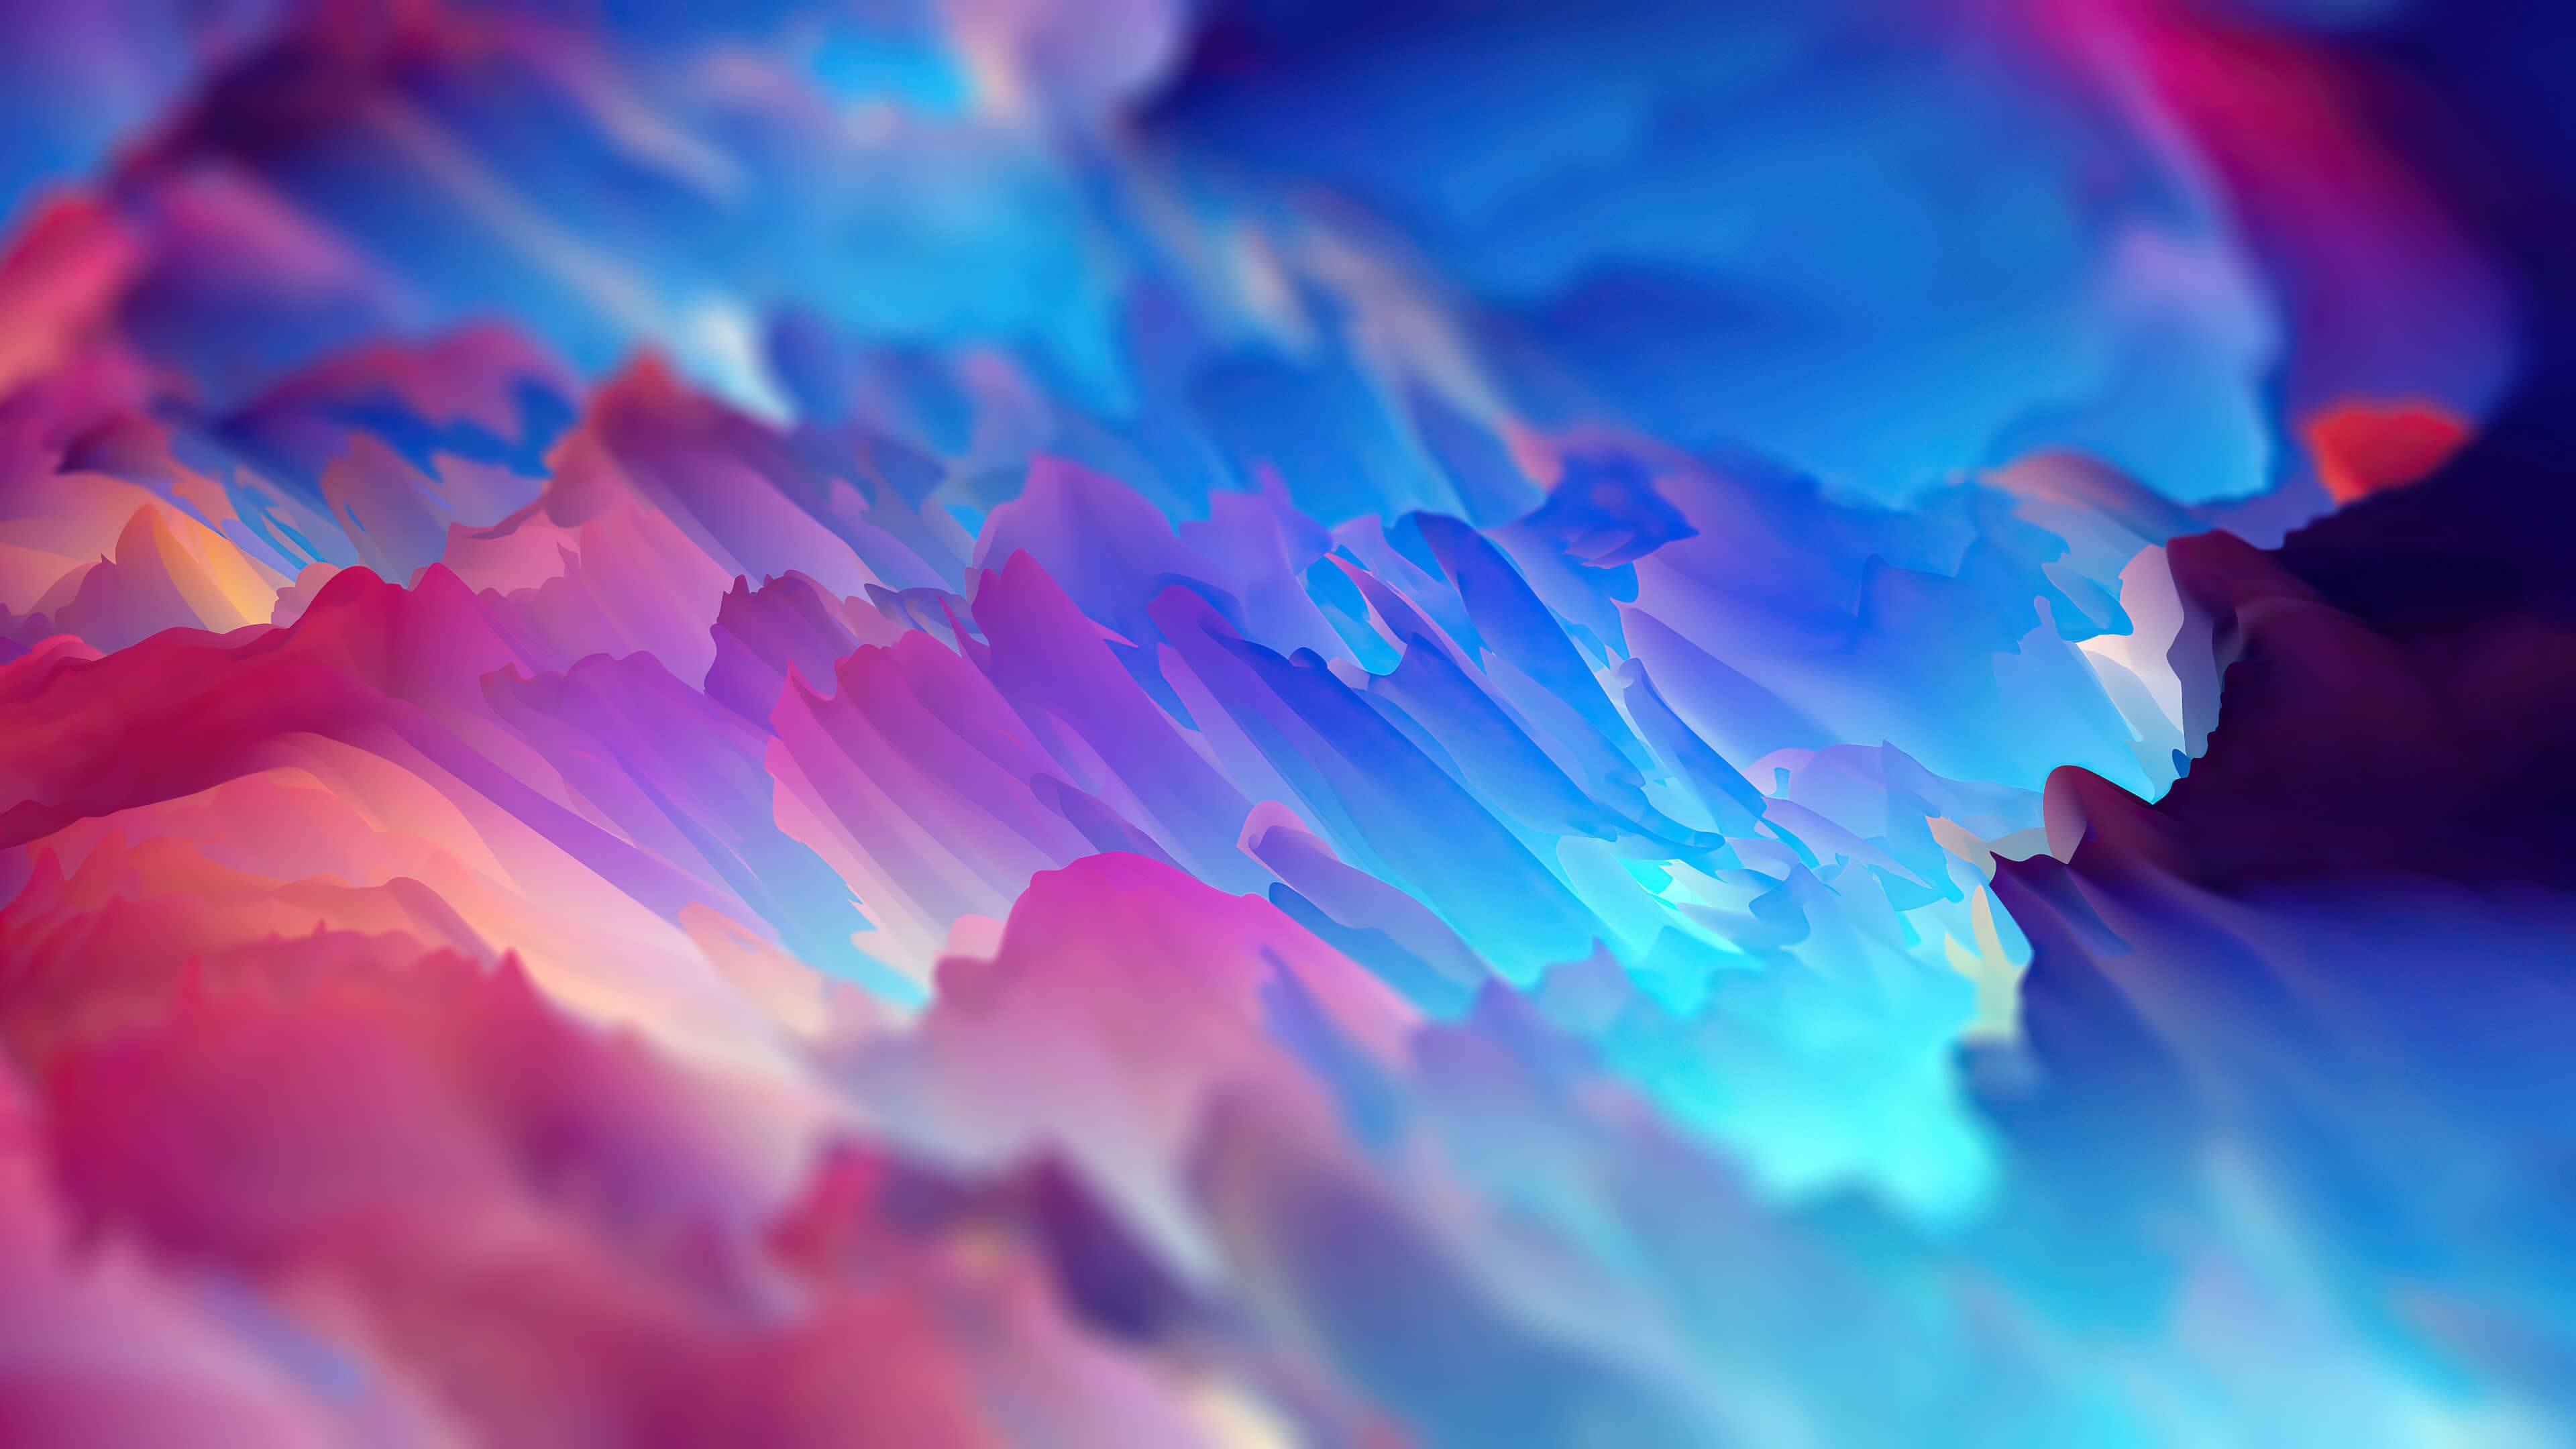 Abstract Art 4K Ultra HD Wallpapers, HD Abstract Art 3840x2160 Backgrounds,  Free Images Download